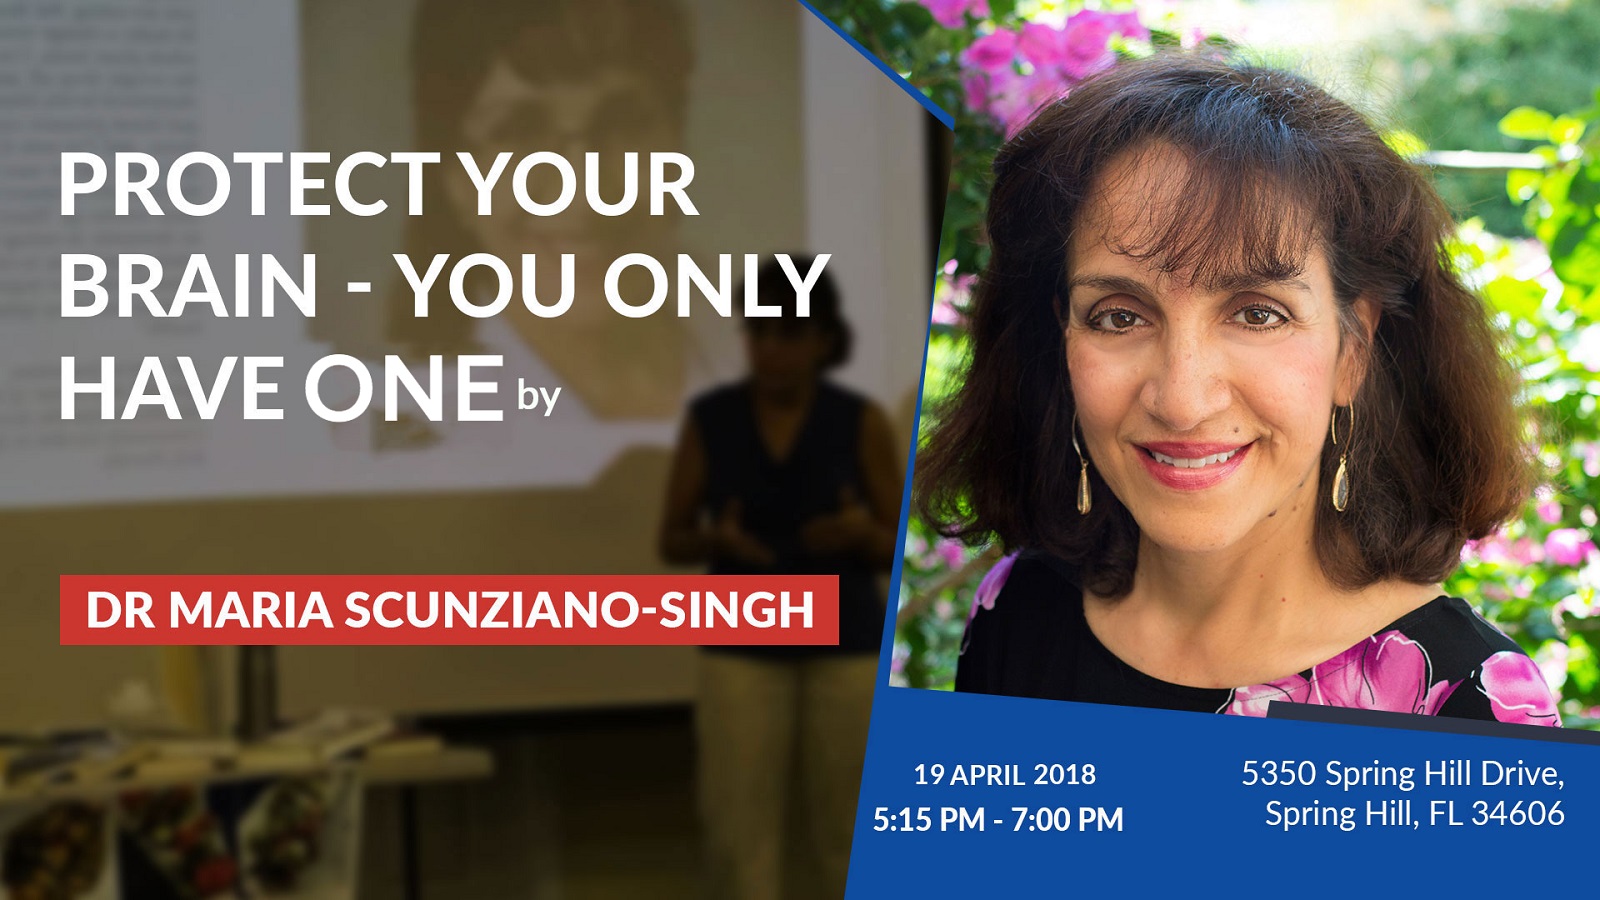 Lecture on Protect Your Brain by Dr. Maris Scunziano-Singh